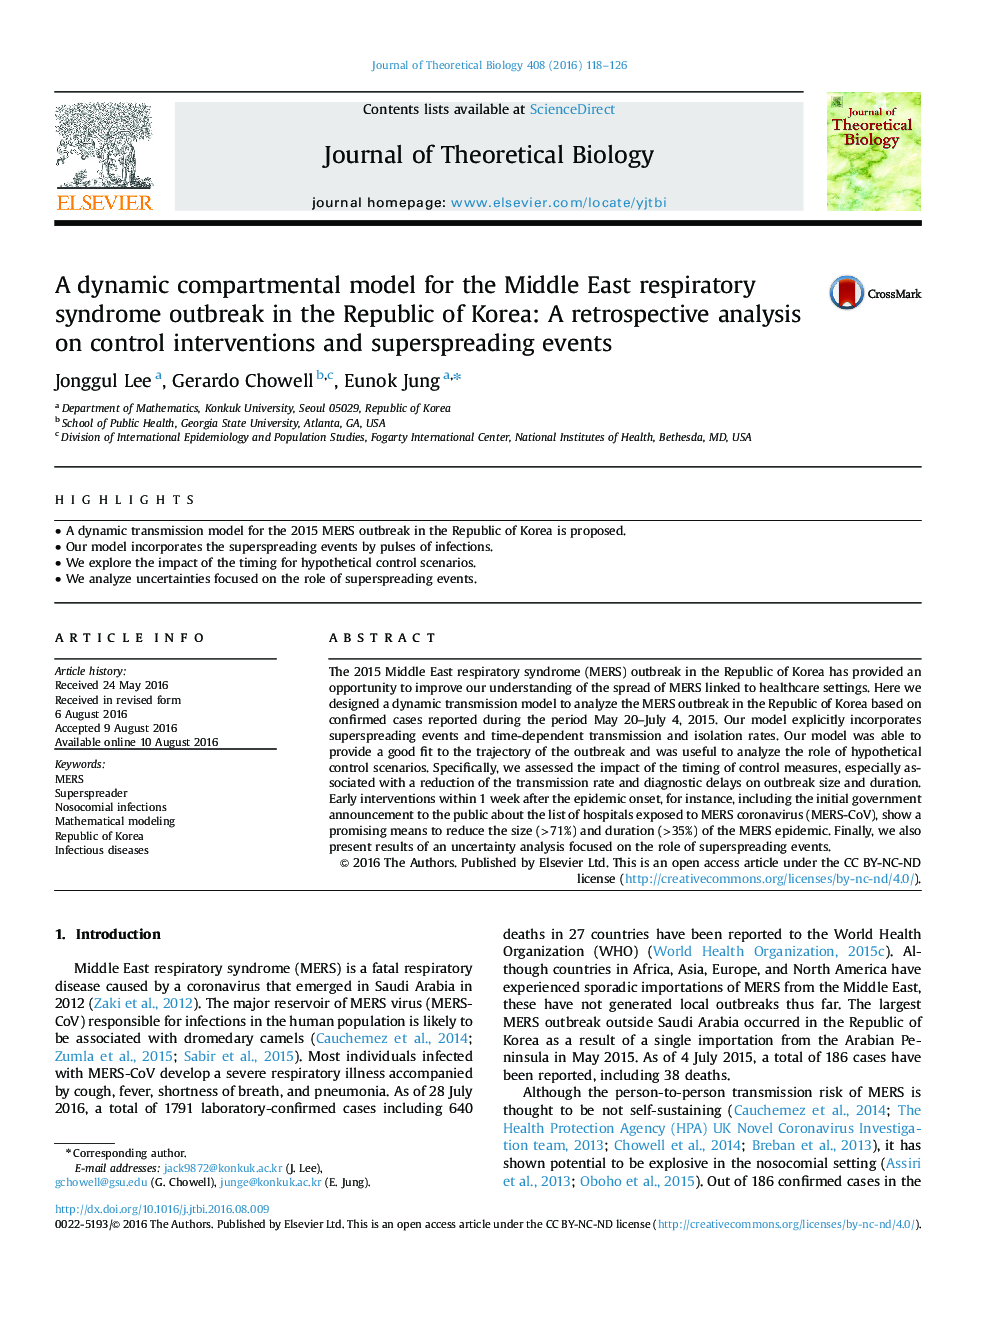 A dynamic compartmental model for the Middle East respiratory syndrome outbreak in the Republic of Korea: A retrospective analysis on control interventions and superspreading events